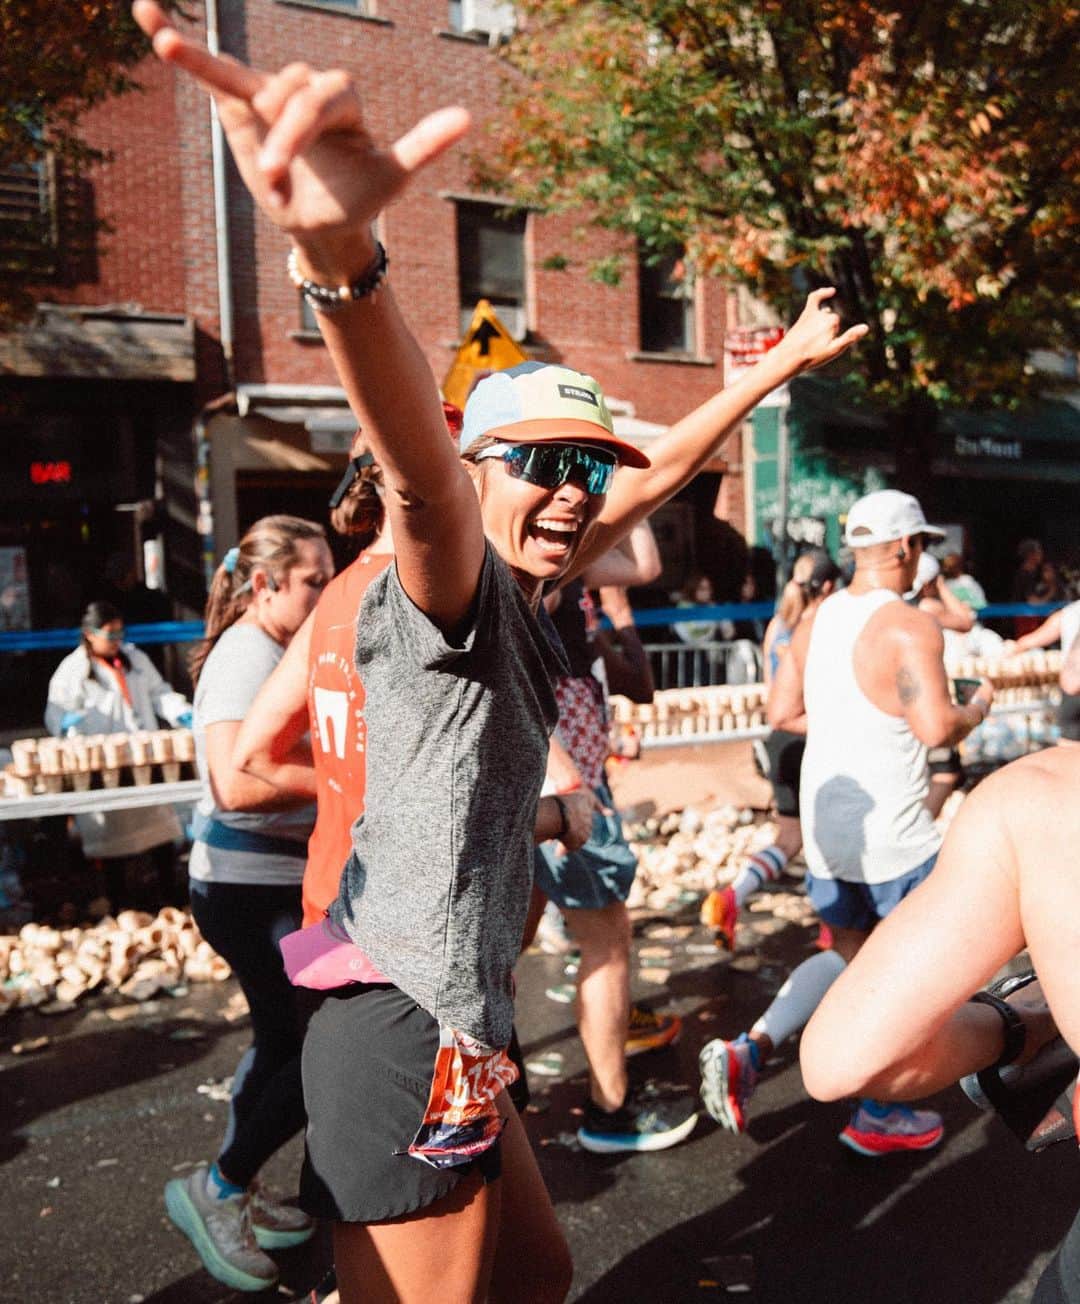 ブリアナ・コープのインスタグラム：「NYC marathon done and dusted! Bare with me this is a long caption 🤣 So two weeks ago I tore my calf... I only told a few people I was so devastated of all the training I’ve done for the marathon. I was super heartbroken and depressed. For a few days i could barely walk, I was going to PT everyday, massage, doctors anything to speed up the recovery process. I couldn’t walk much without having to sit down. I came to New York early to see a specialist @doctorgsports to see if there was any hope I could run. The way I was hobbling around the city chances looked very low 😂 Previously My goal for this marathon was to finish at 3:45/4 hours but that was out the window. I told myself just finish it. It was the deepest I’ve ever done mentally. I was in pain every step and kept thinking next mile it will go away. I was in the PAIN CAVE😂🤣 i just kept focusing on the ground and one step at a time. I did so much positive self talk the whole way. Around mile 20 i was starting to hit a wall and all of a sudden i ran into my friend @kthoff7 and she gave me the boost of positive energy. We ran the last 6 miles together smiling laughing and she kept pumping me up. when i crossed the finish line i was so proud of myself for pushing through and digging deep. I’ve always believed it’s so important on how you talk to yourself and what the mind has control over and yesterday proved that to me. The mind is a powerful thing🧘‍♀️🧠🔋 @strava」